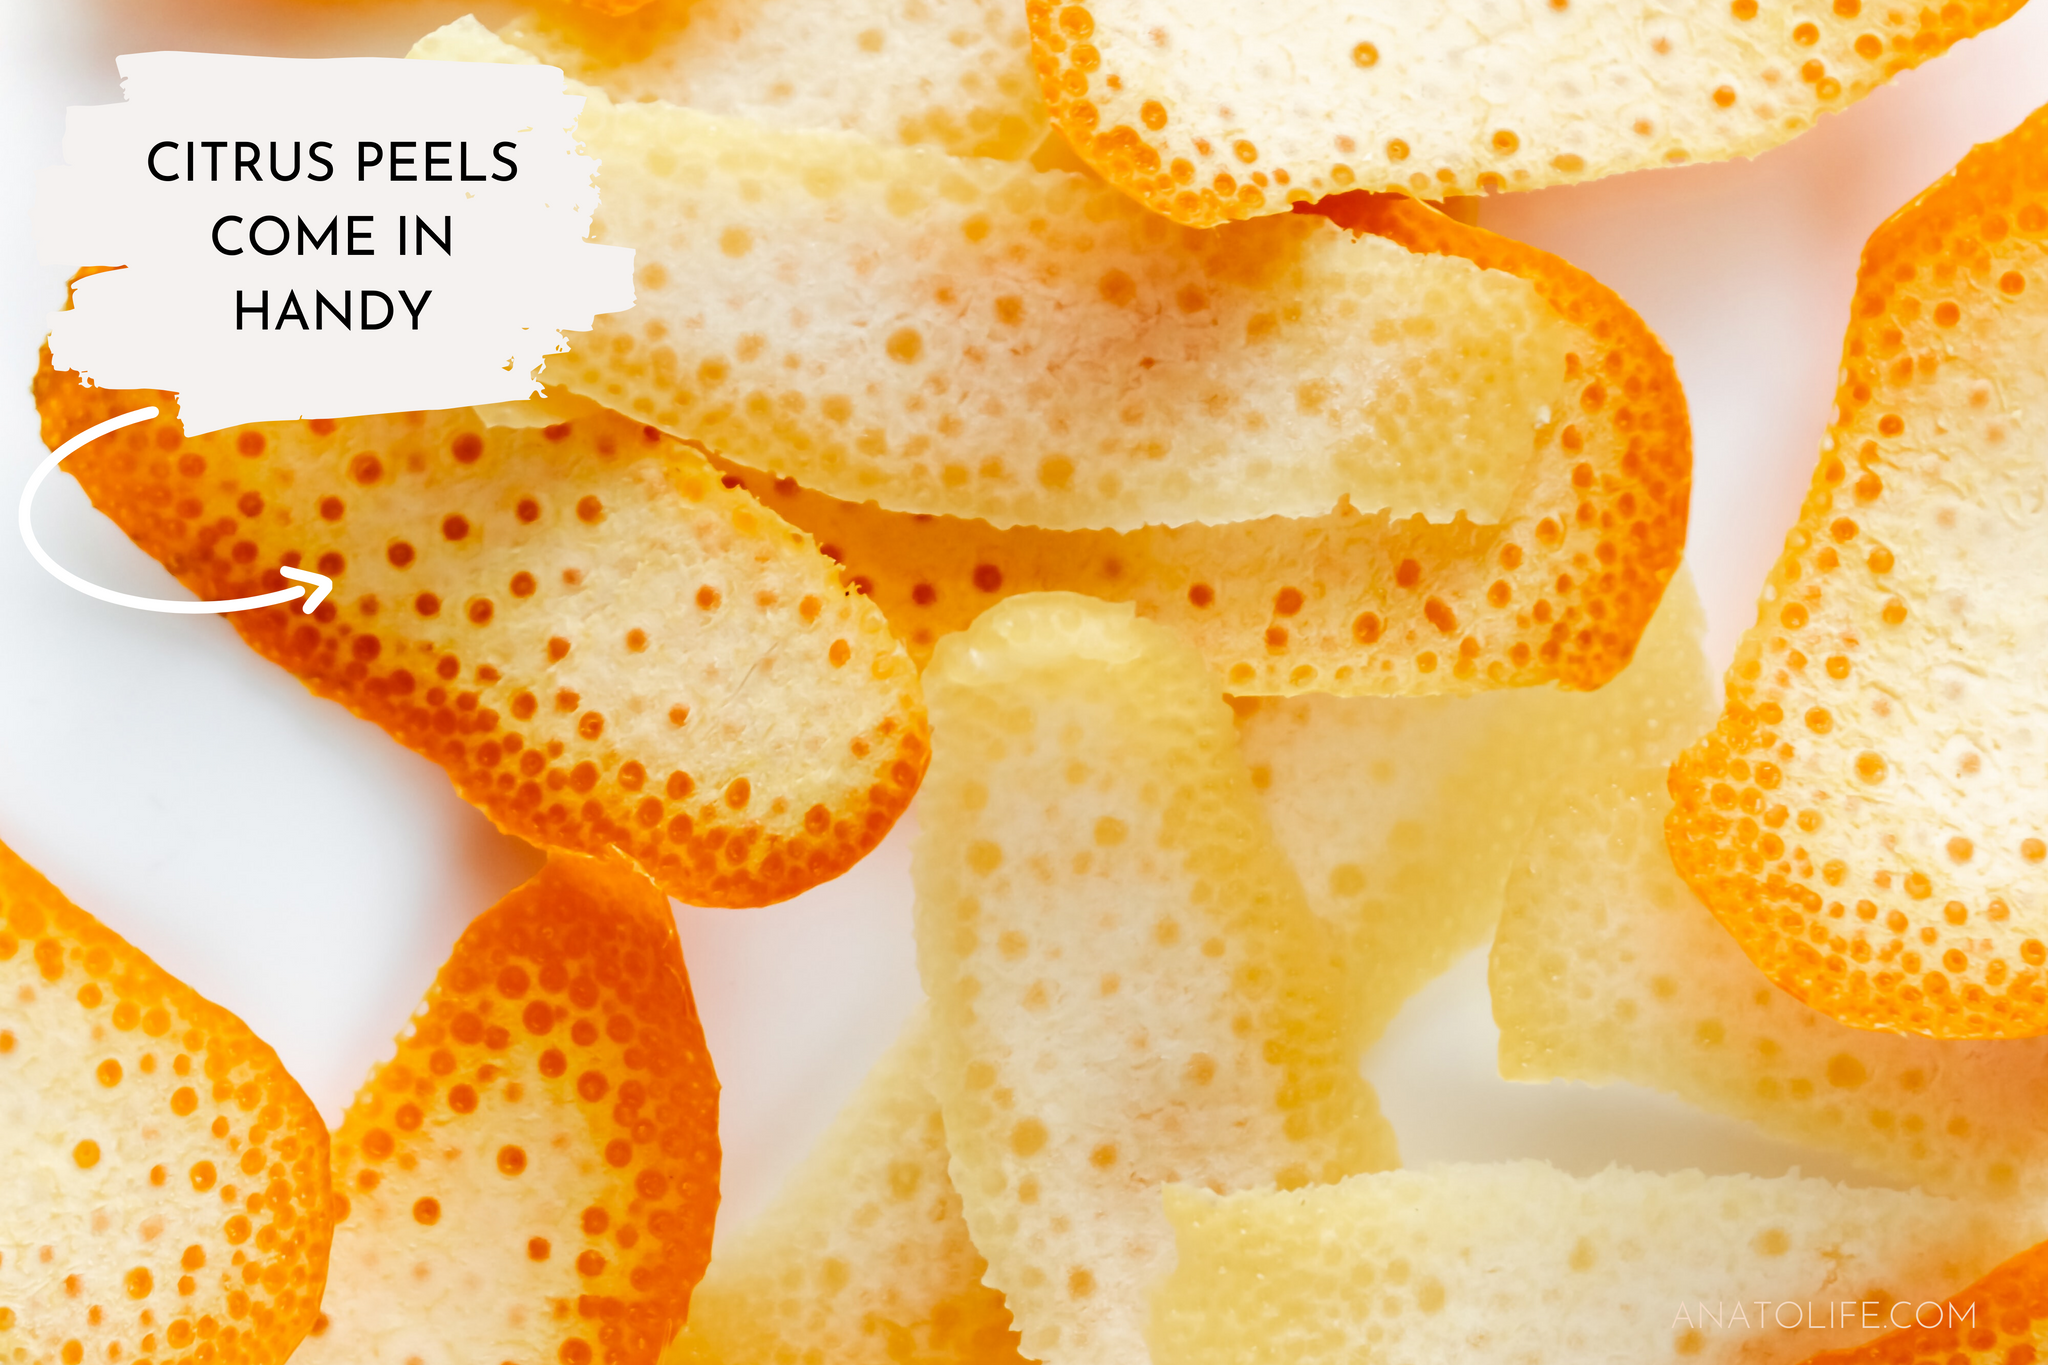 CITRUS PEELS COME IN HANDY BY ANATO